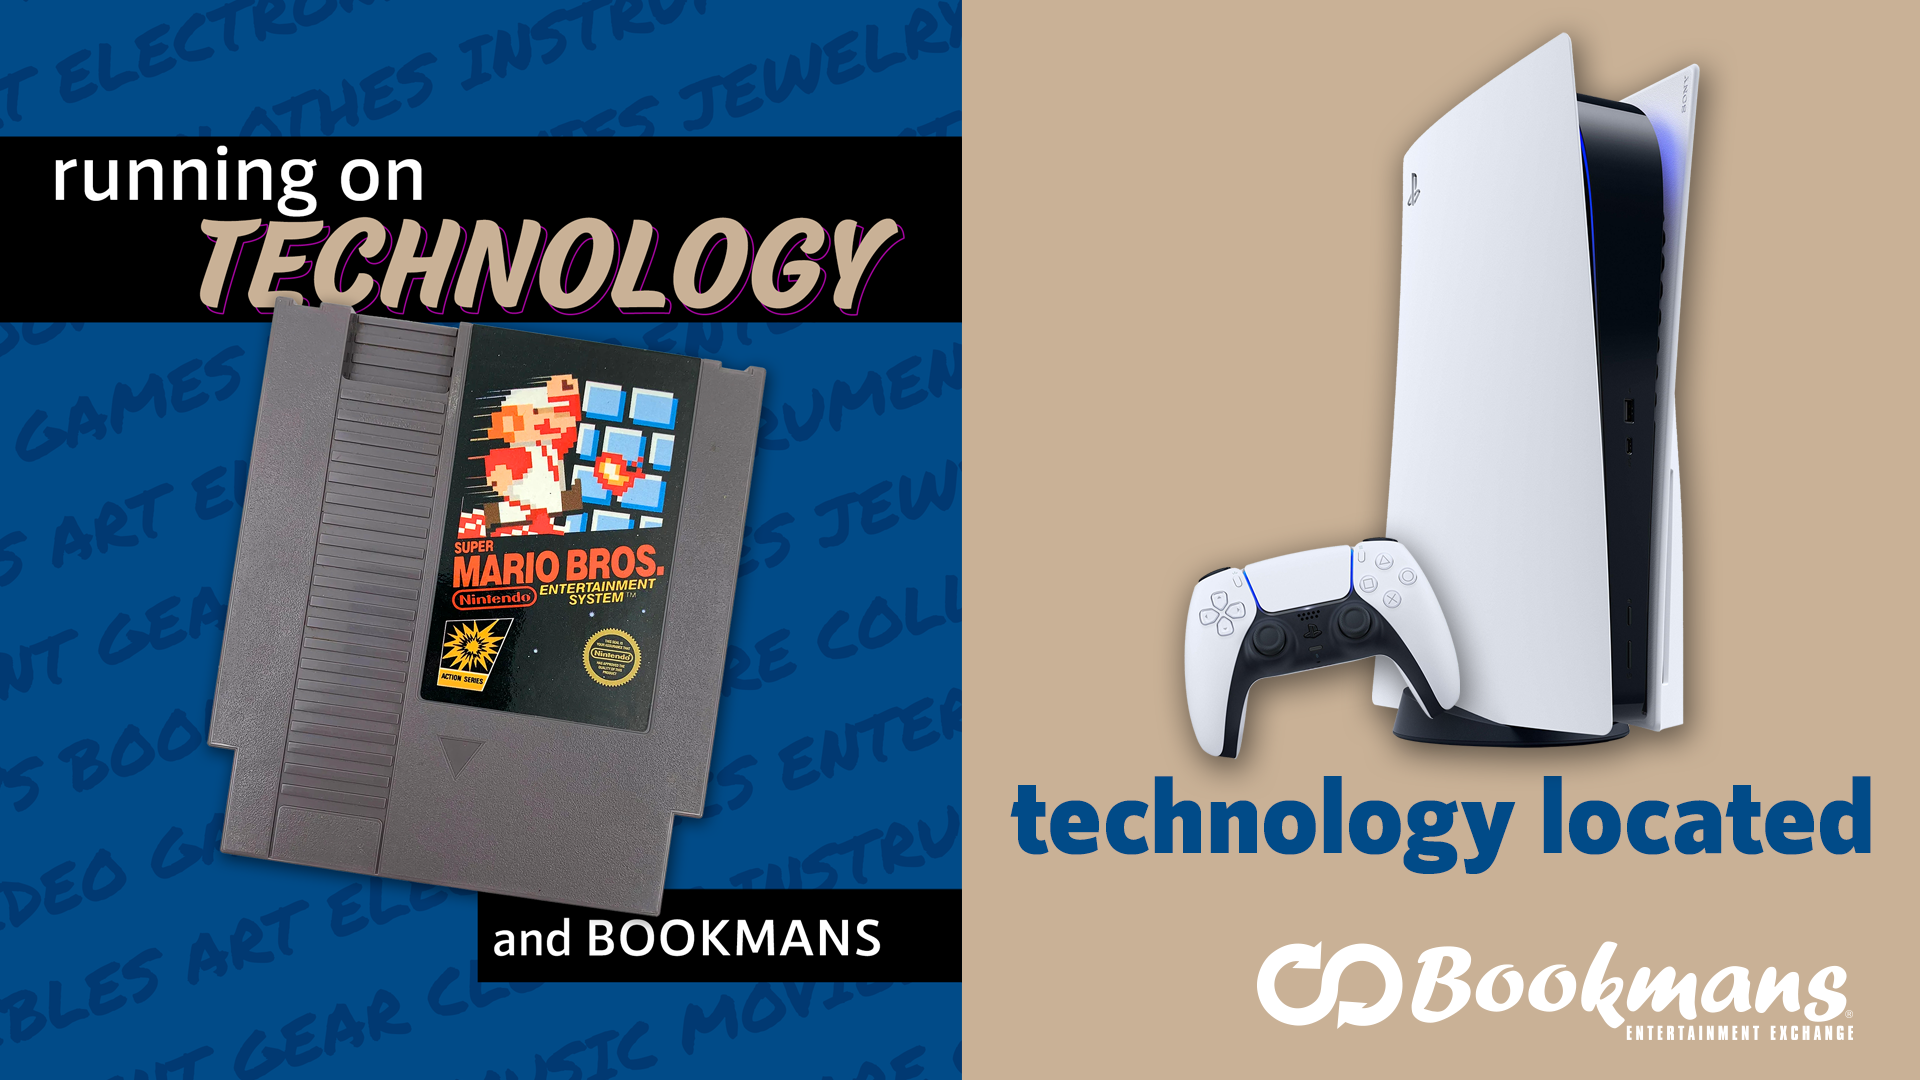 blue background on the left with nintendo cartridge Super Mario Game and the words running on technology. On the right against a tan background is a PS5 gaming console and a controller and it reads technology located.